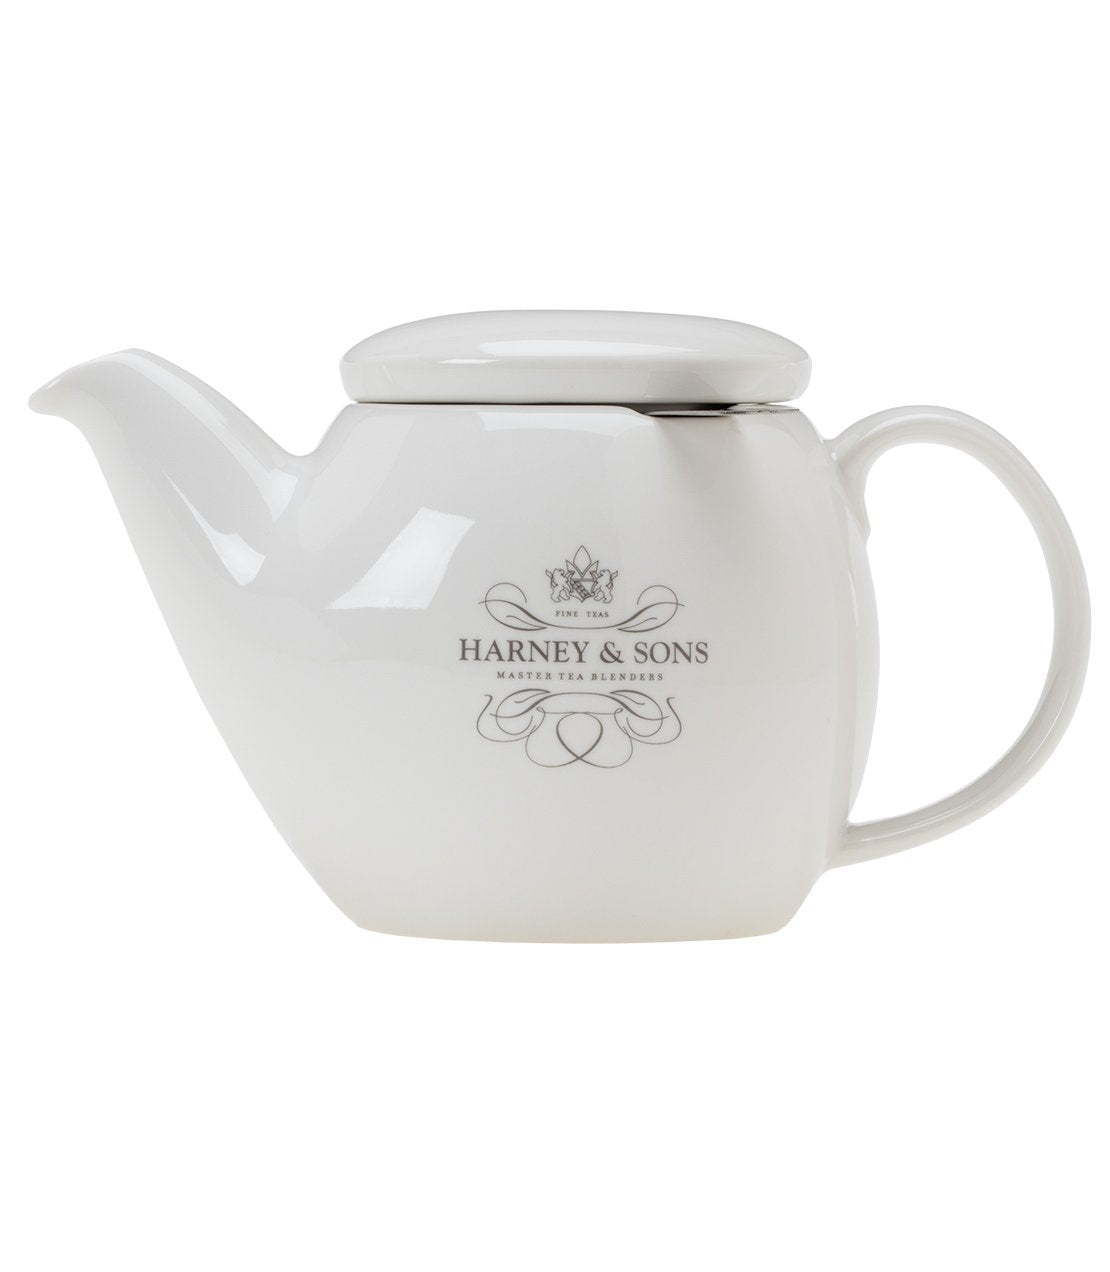 Harney & Sons Teapot with Infuser -   - Harney & Sons Fine Teas